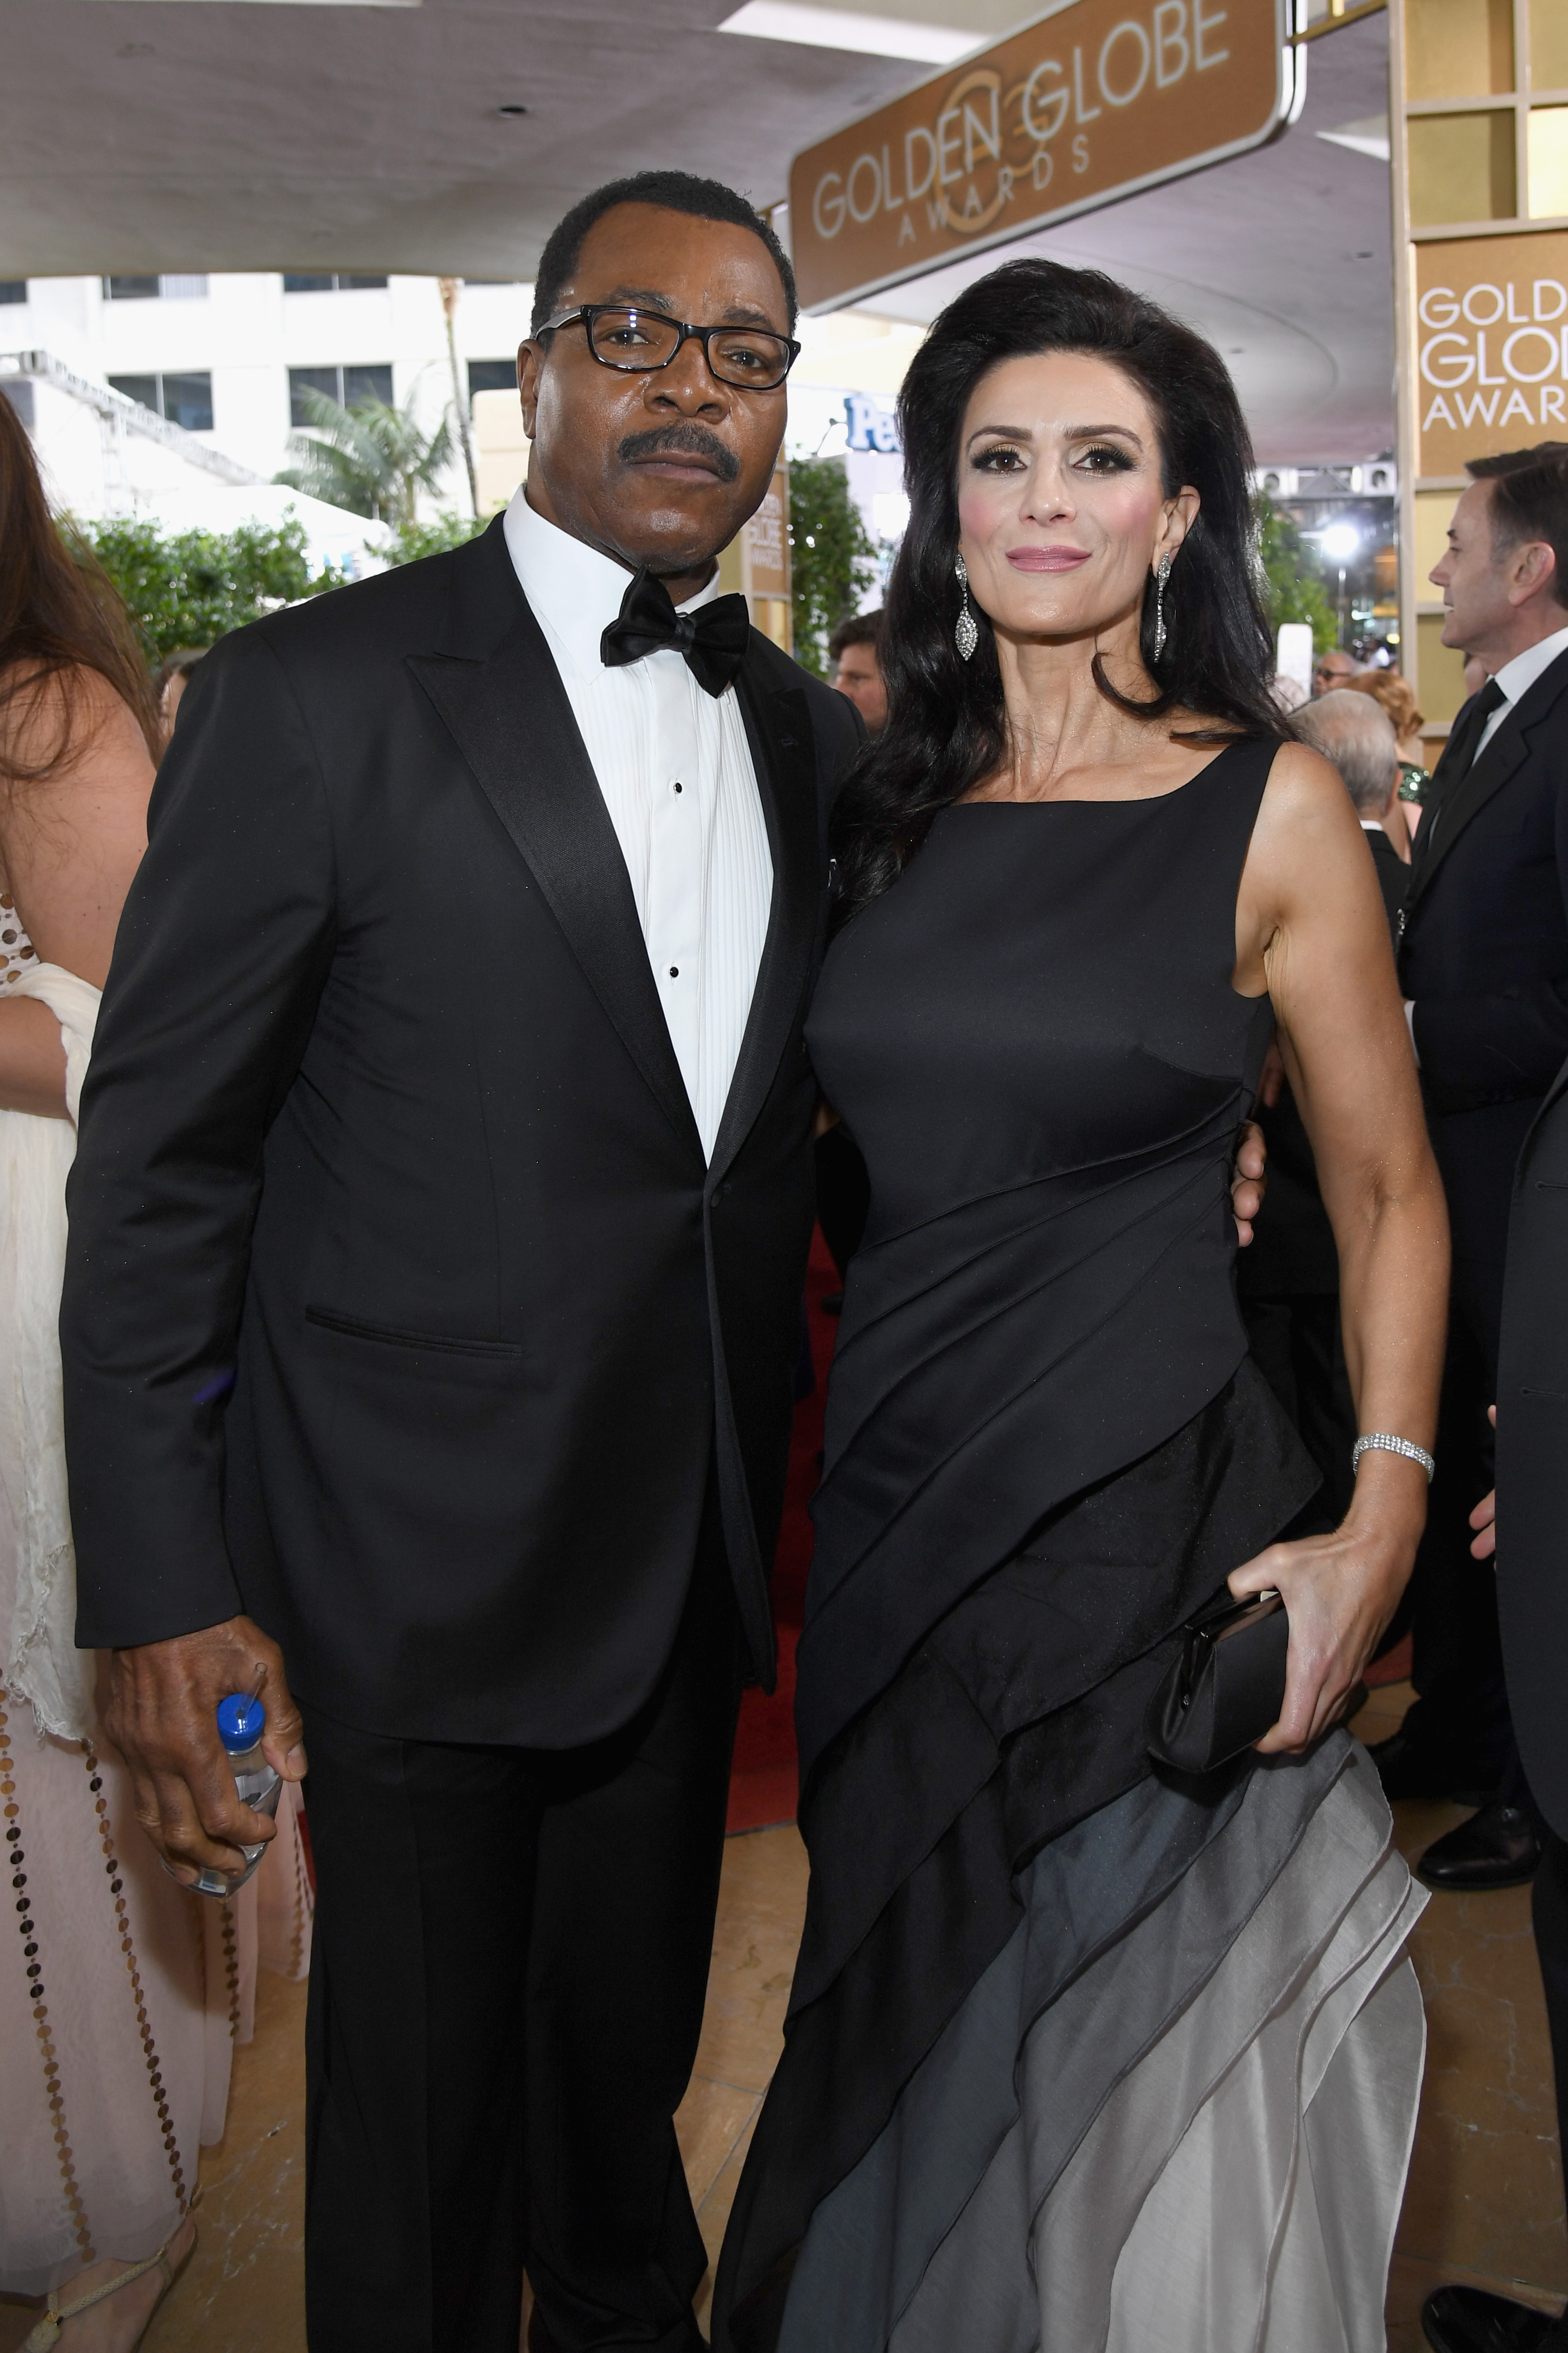 Actors Carl Weathers (L) and Christine Kludjian at the 74th annual Golden Globe Awards sponsored by FIJI Water at The Beverly Hilton Hotel on January 8, 2017 in Beverly Hills, California | Source: Getty Images